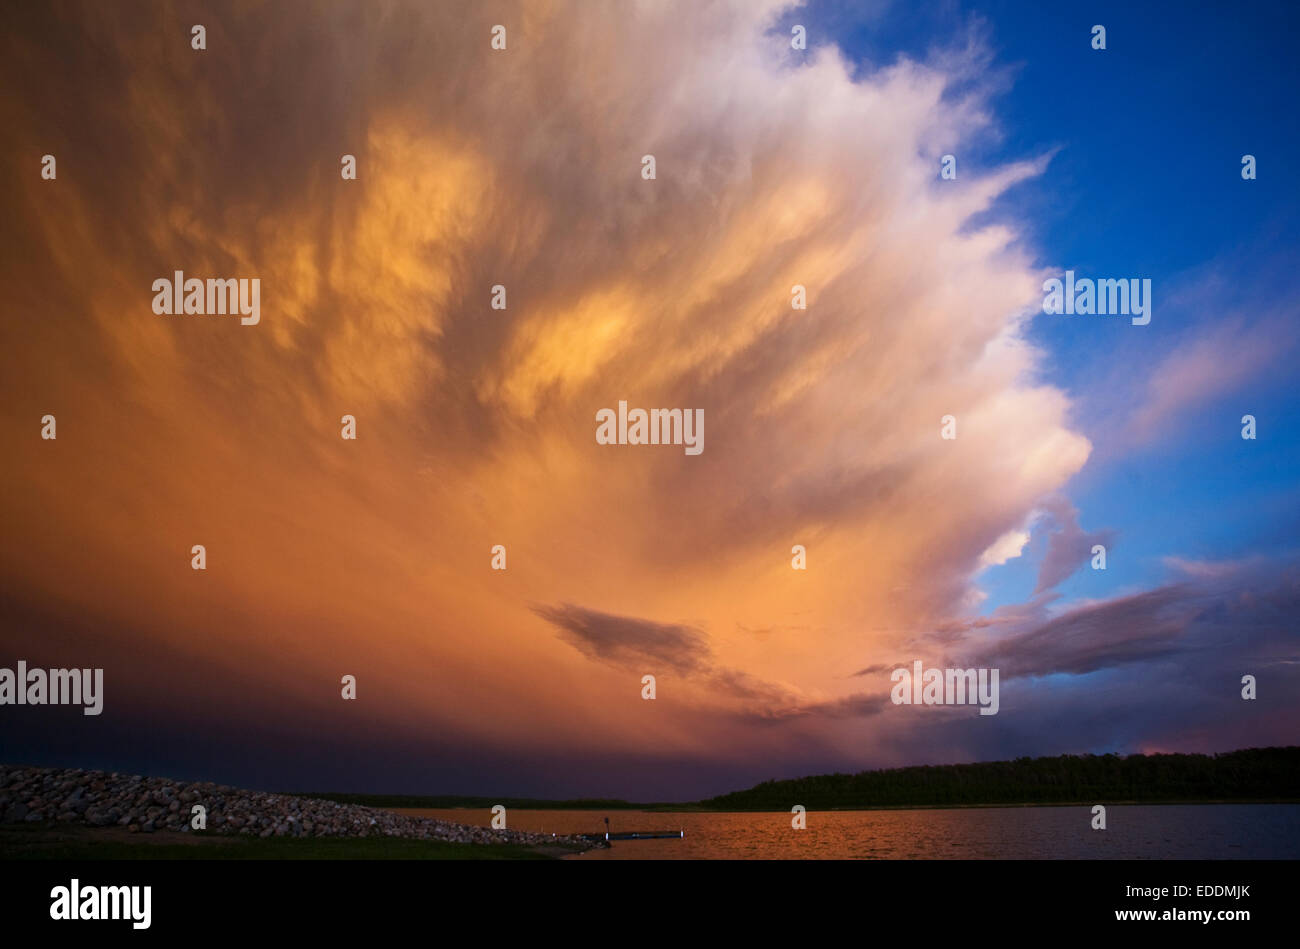 A cloud formation, a storm cloud reflecting sunlight. Stock Photo